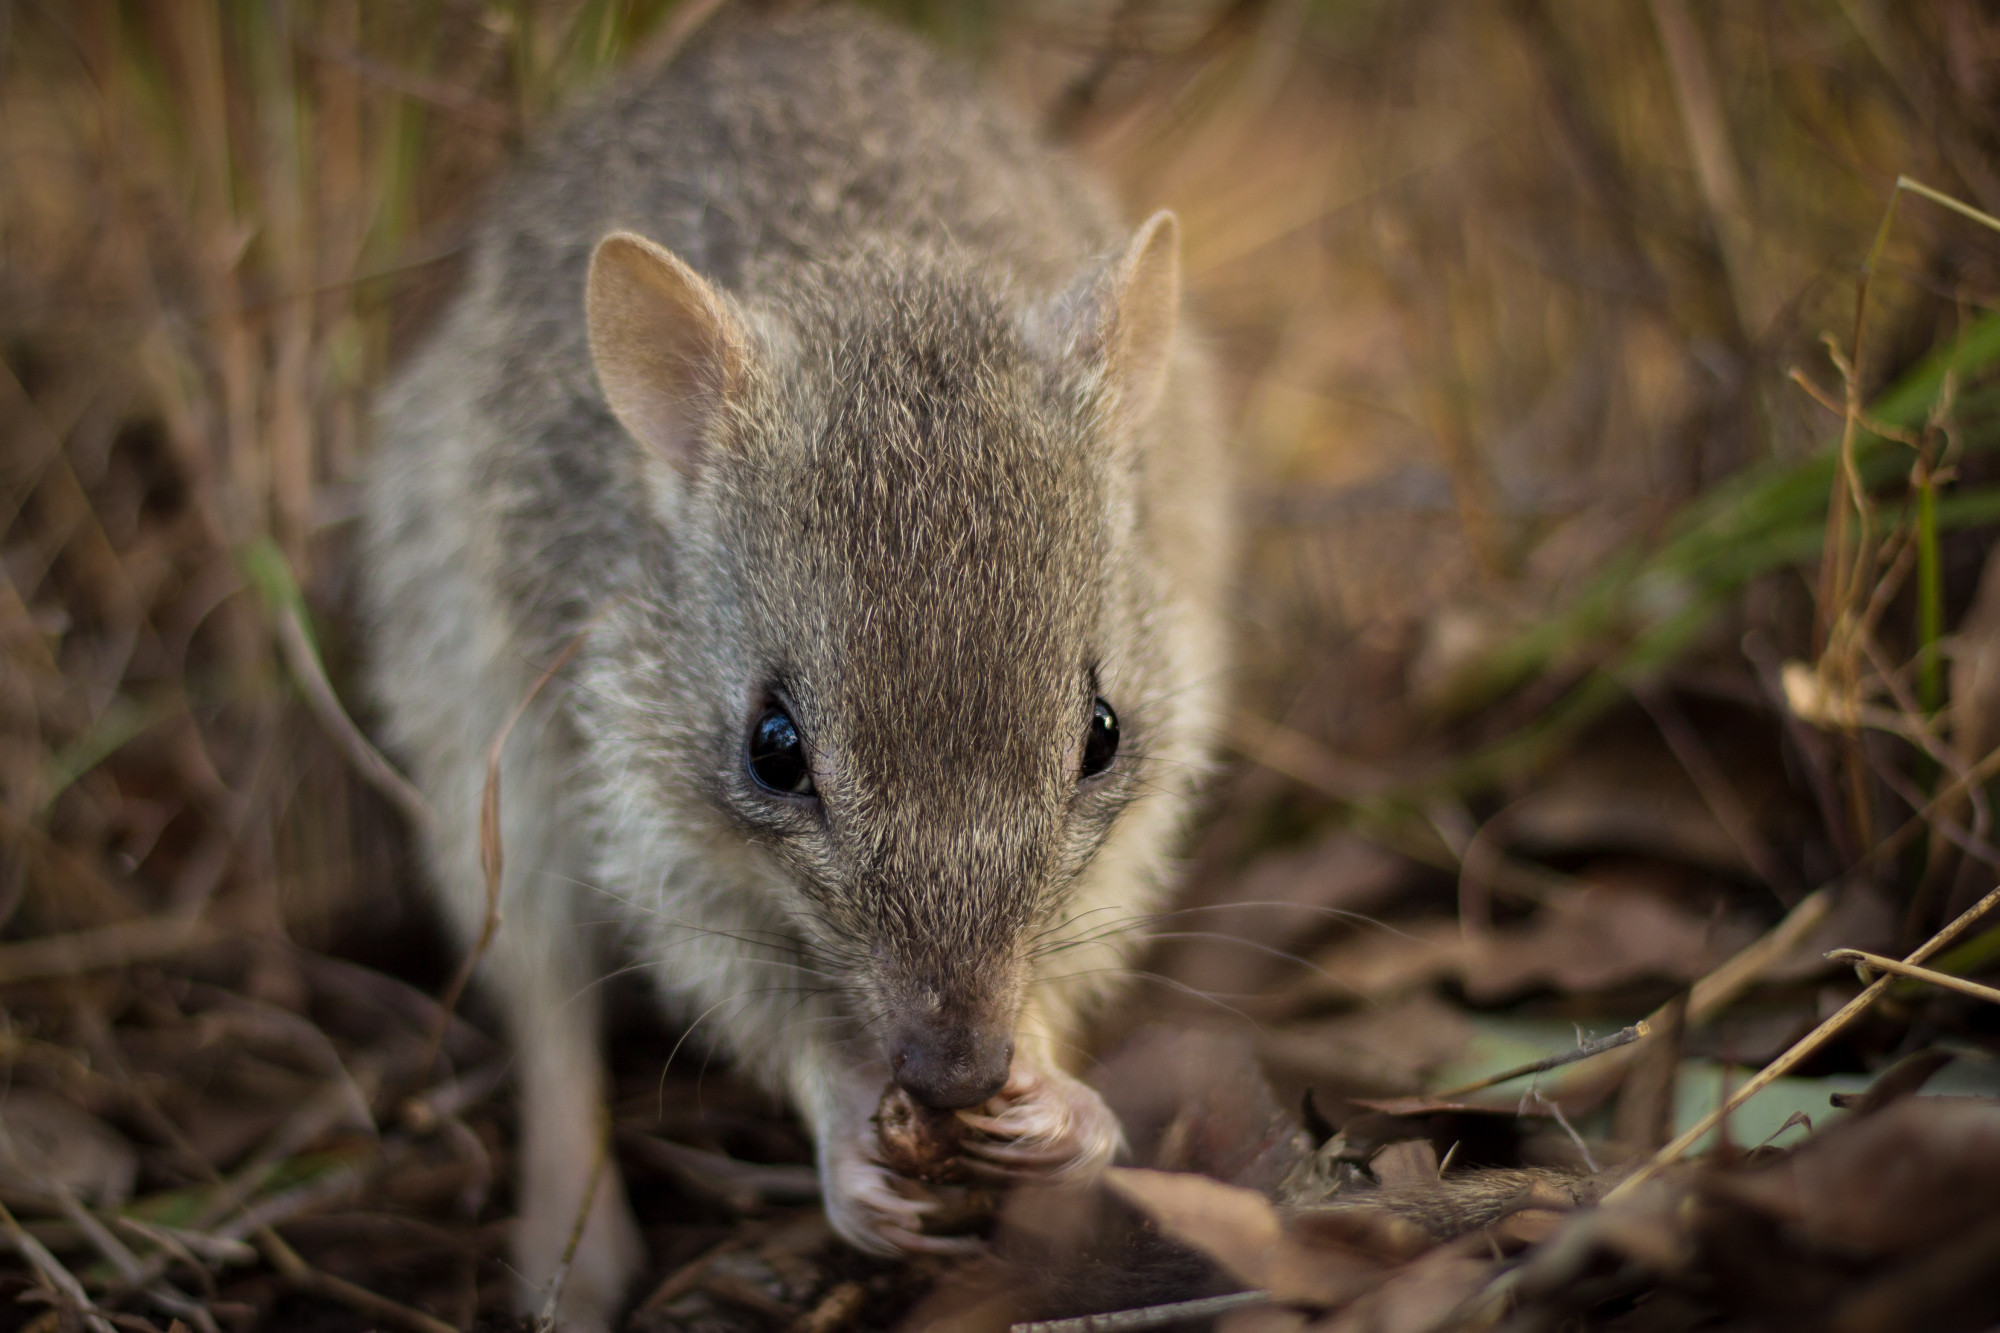 The endangered northern bettong, which is only found around the Mareeba area. Photo credit Stephanie Todd